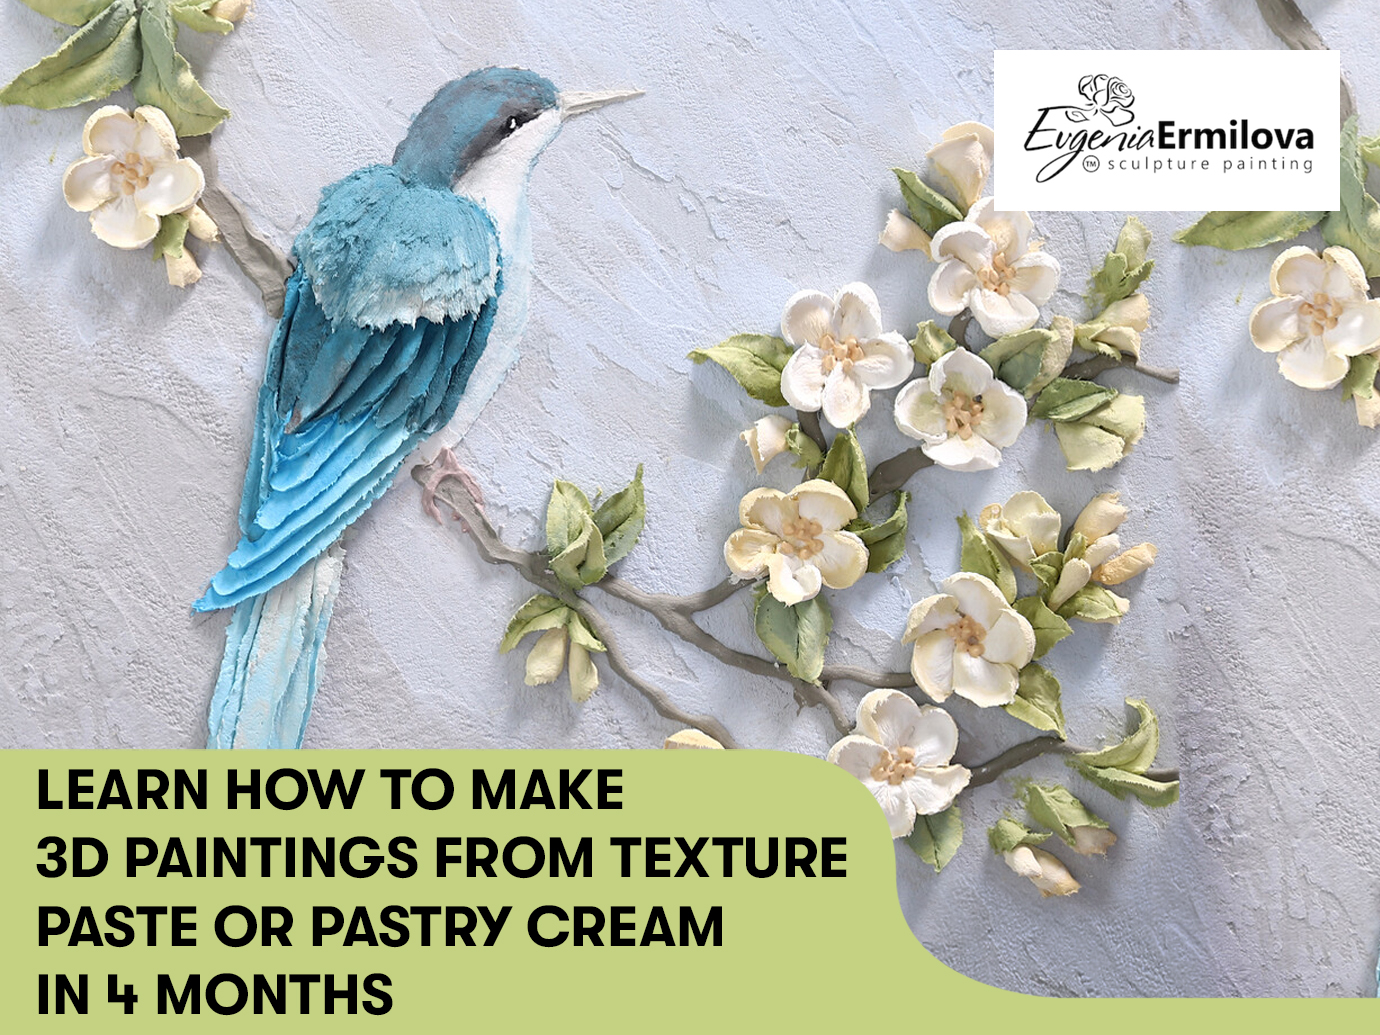 Learn how to make 3d paintings from texture paste or pastry cream in 4 months